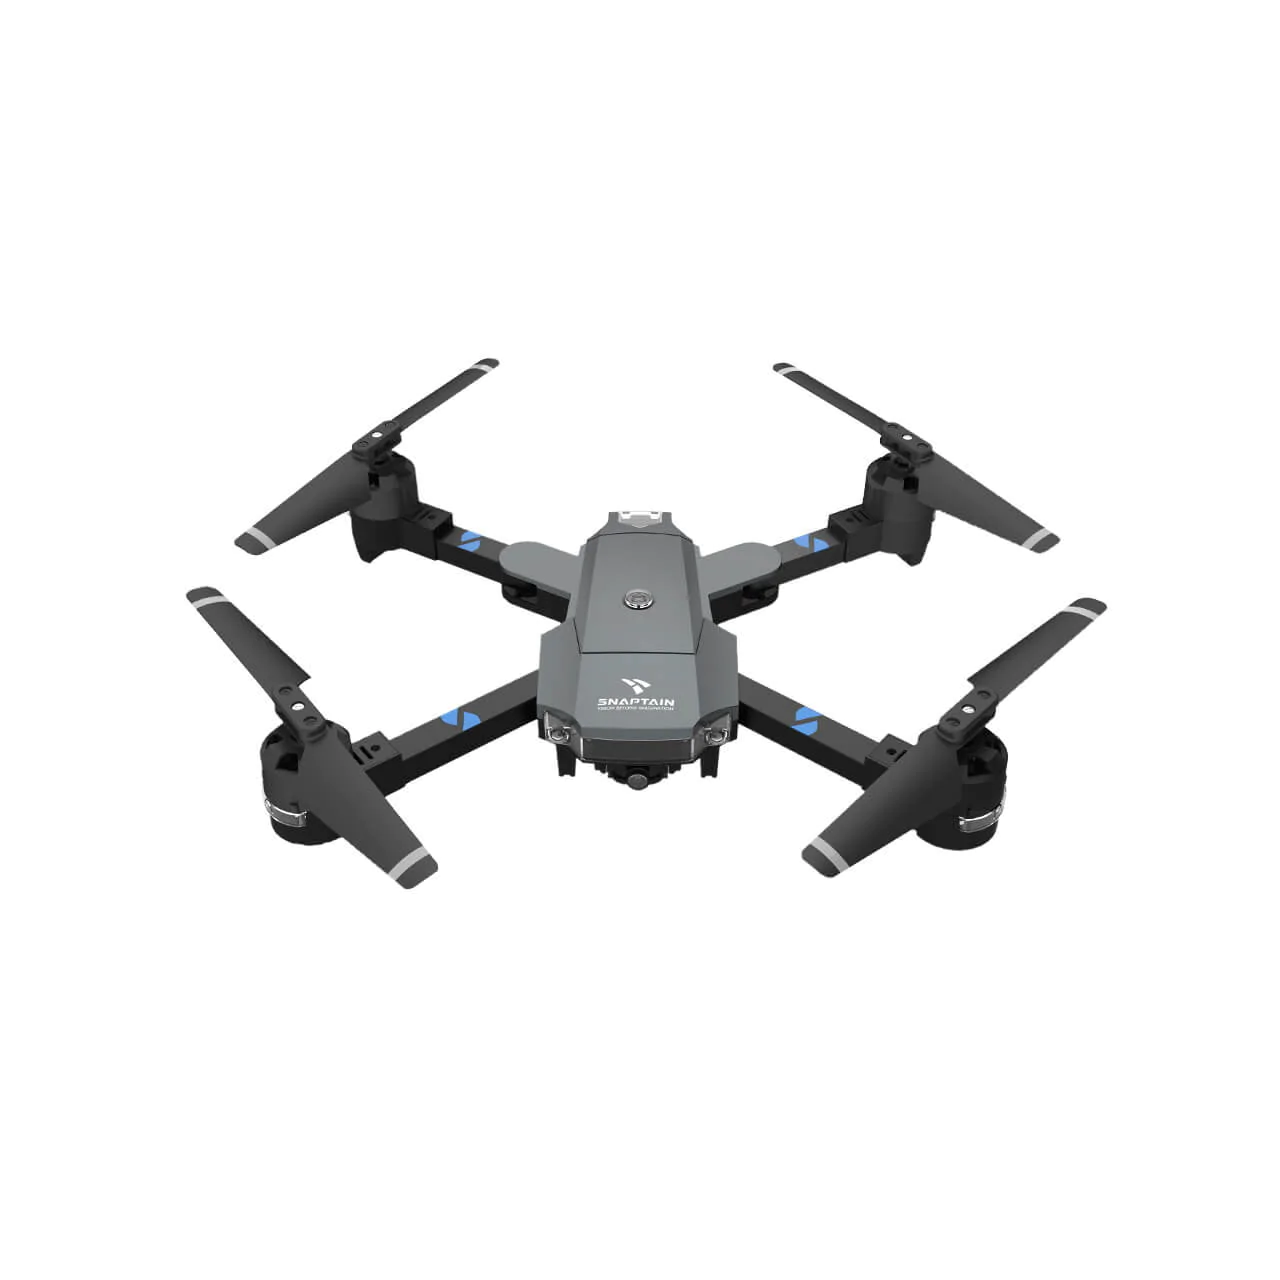 Snaptain A15 Drone for Home Security